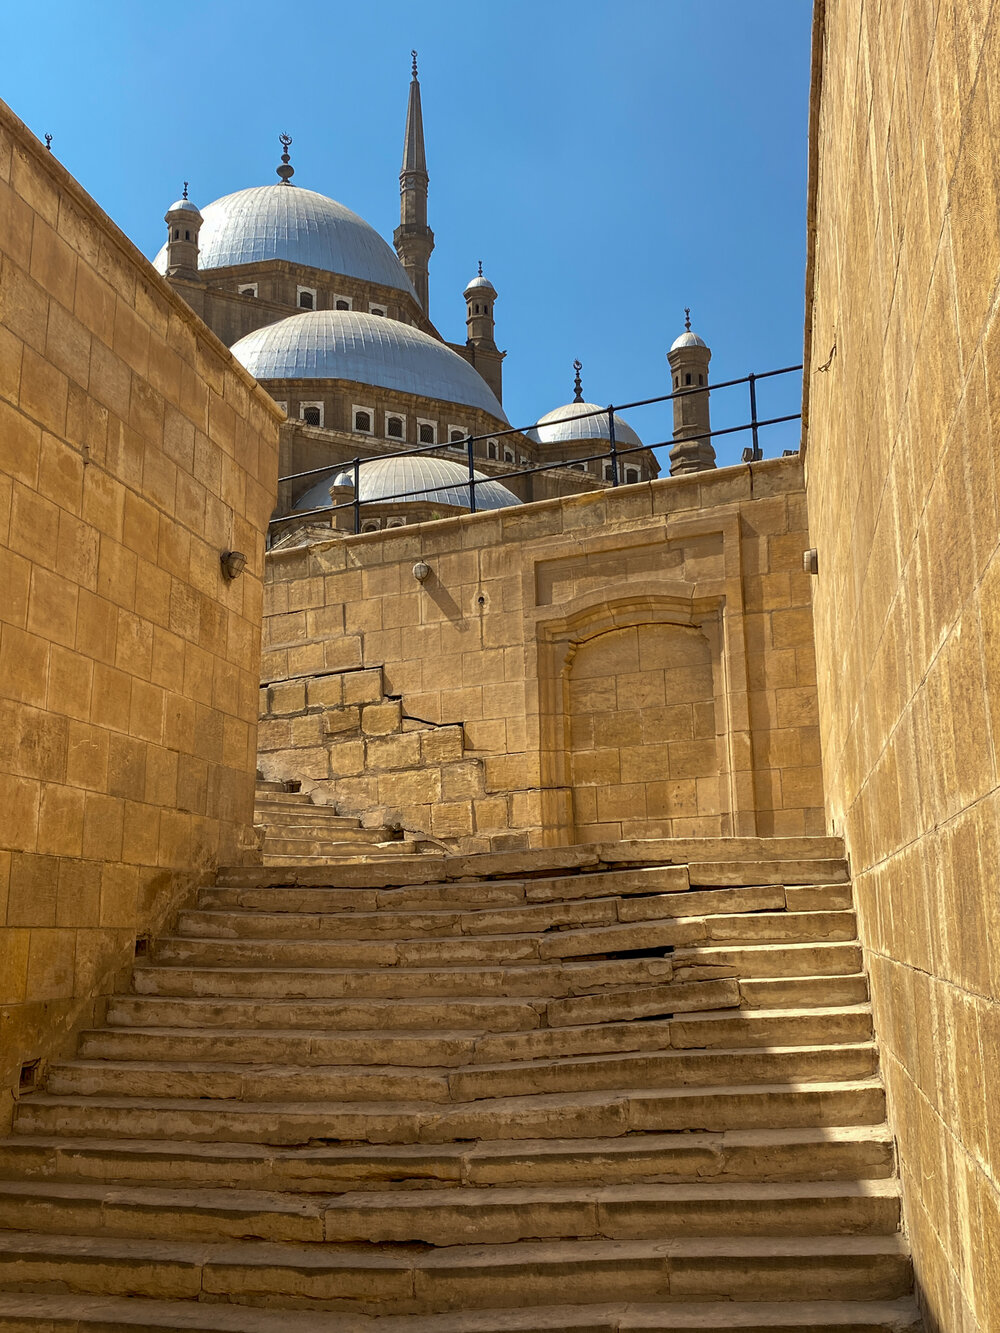 Photo opportunities at the Cairo Citadel